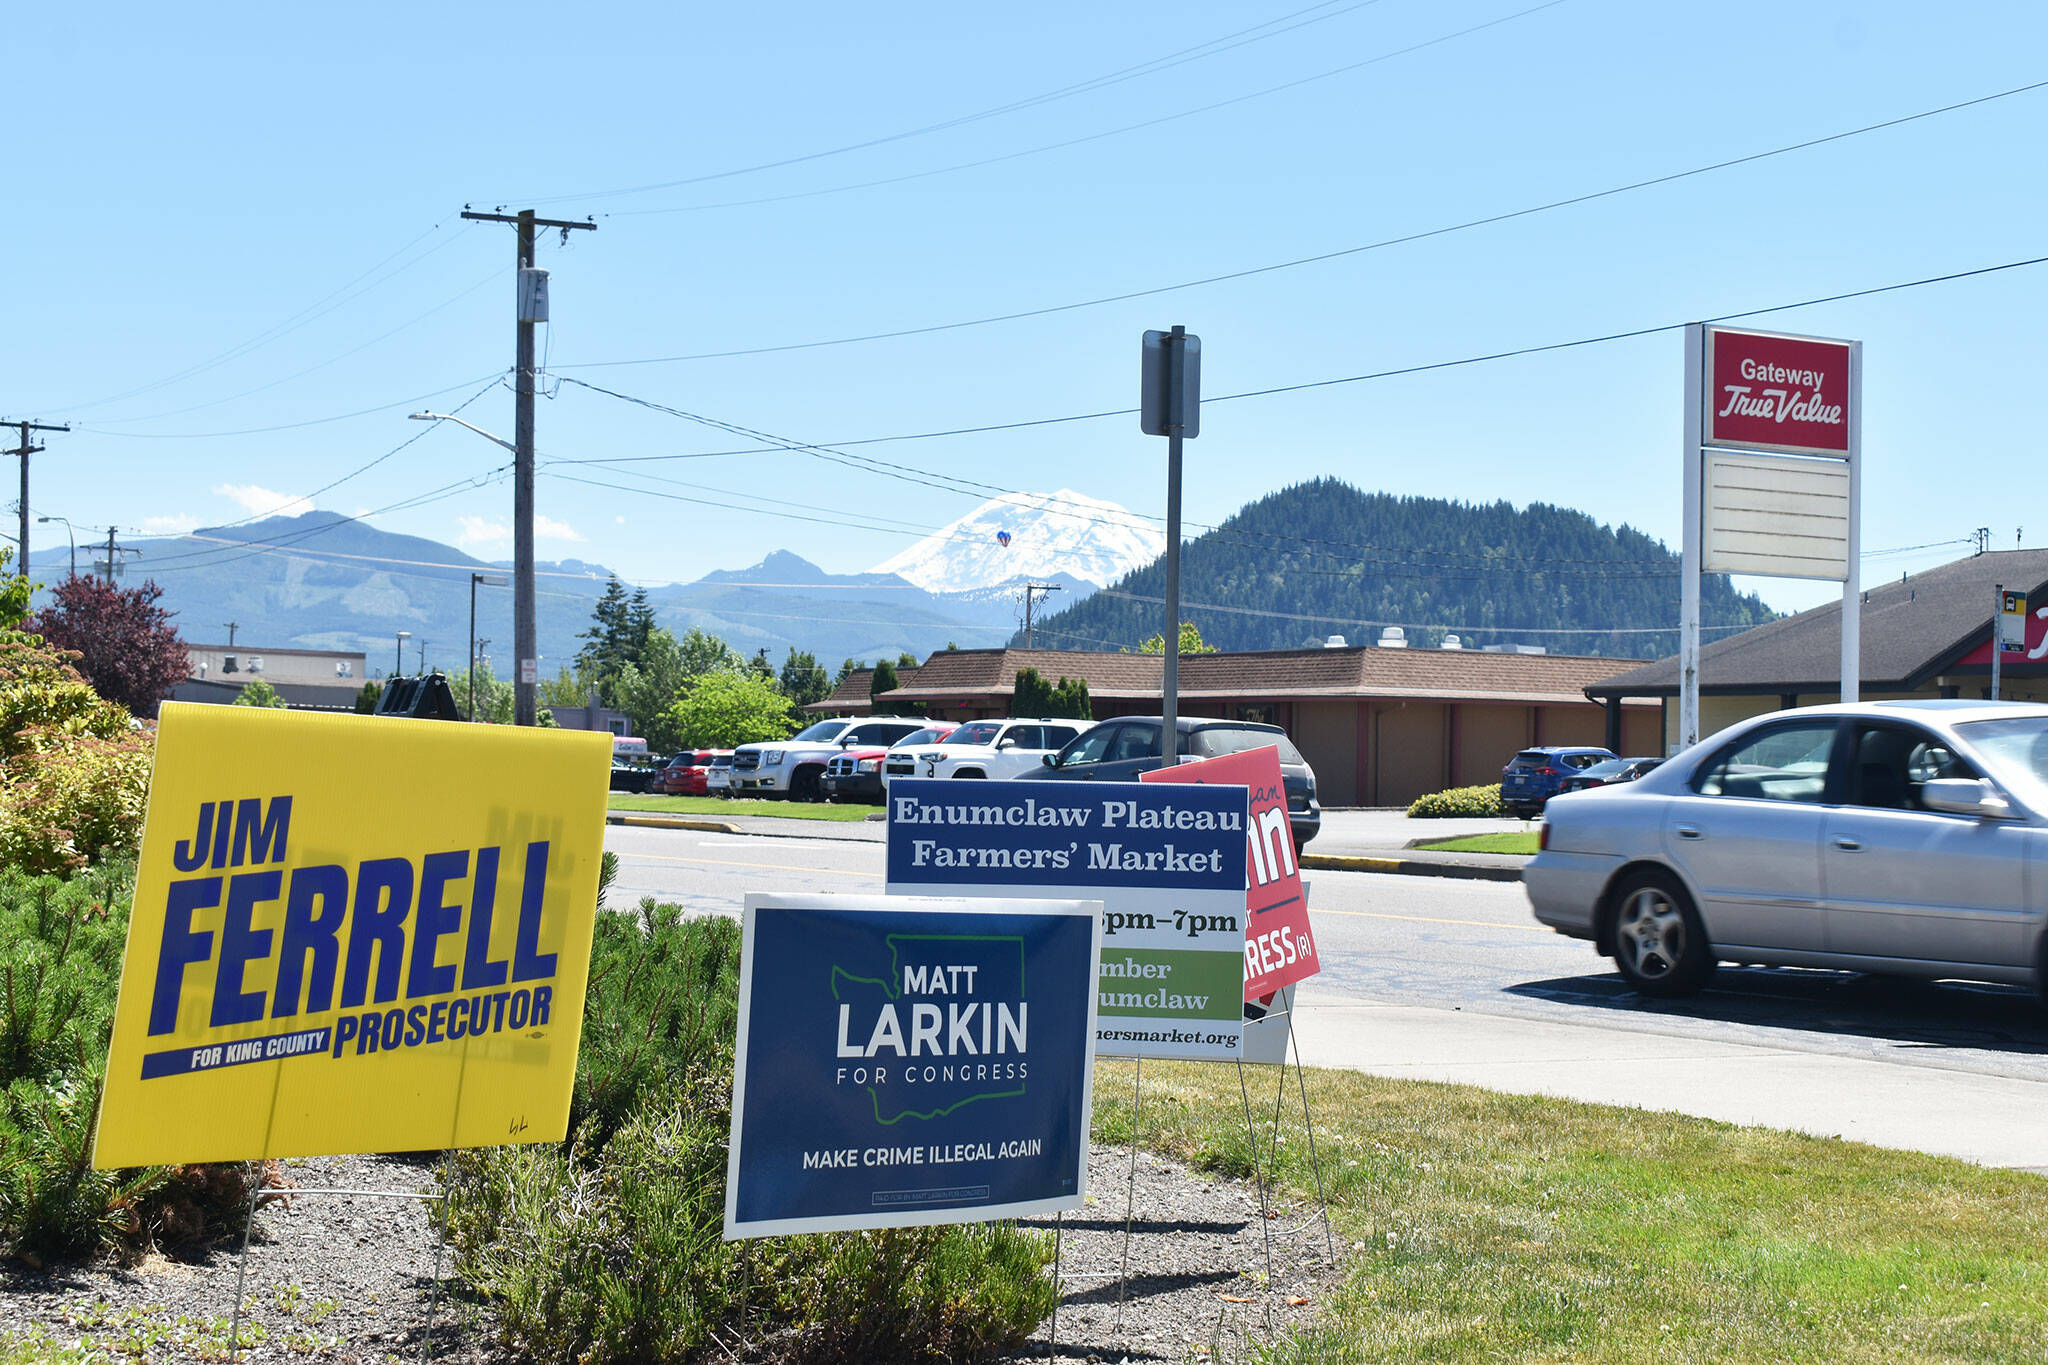 Political campaign signs, as well as a sign for the Enumclaw Plateau Farmer’s Market, are posted along Highway 410 in Enumclaw on a hot July afternoon. Mount Rainier appears in the background. Photo by Alex Bruell.